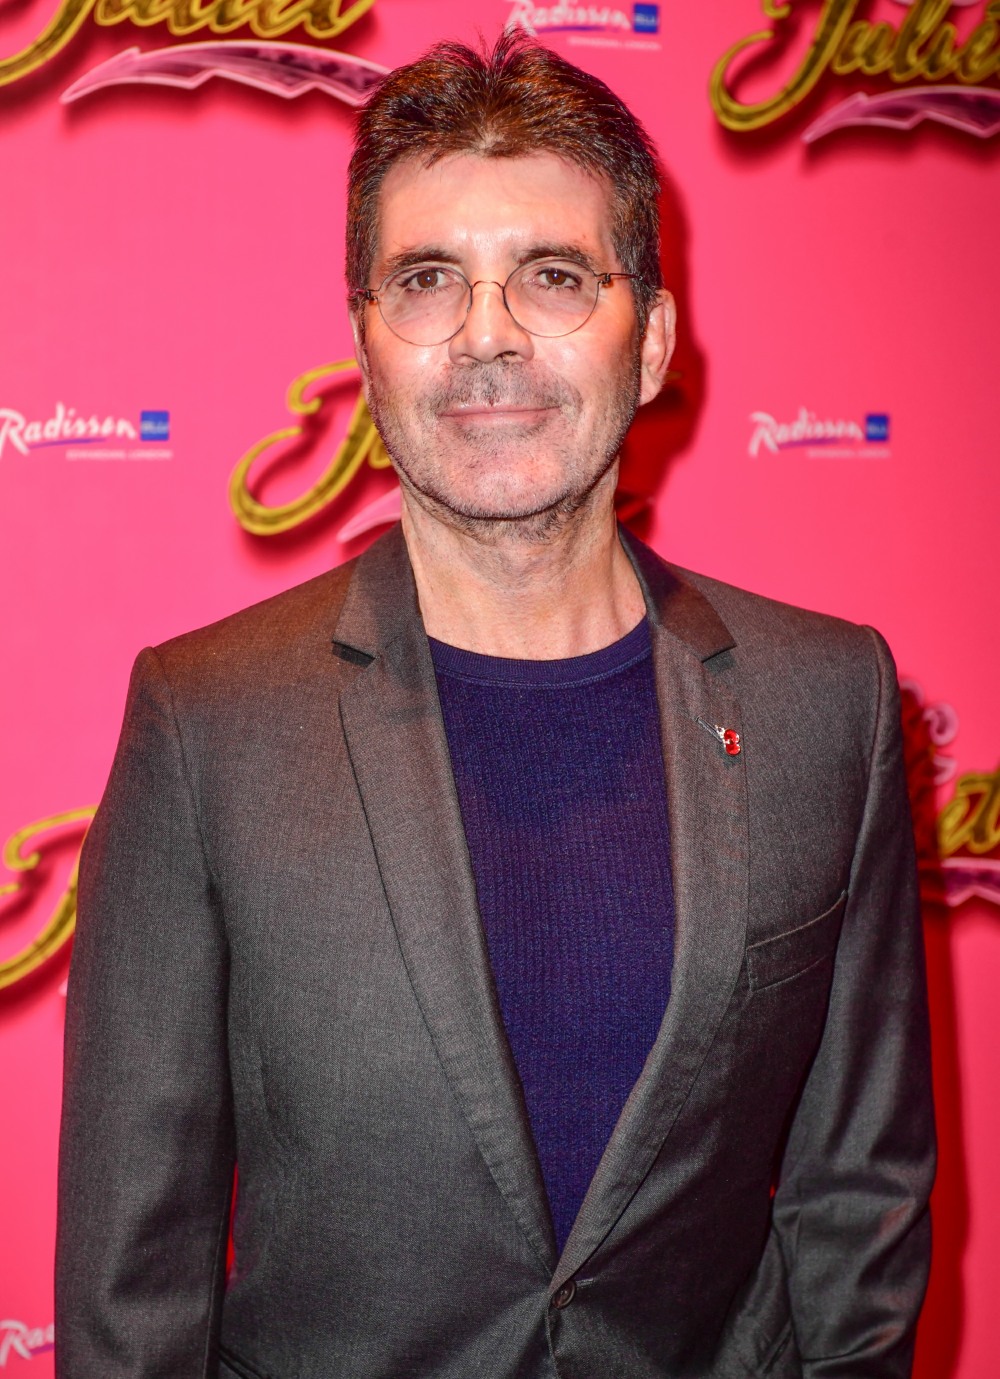 Simon Cowell seen at the 'And Juliet' musical press night at The Shaftesbury Theatre, London, UK - 20 Nov 2019